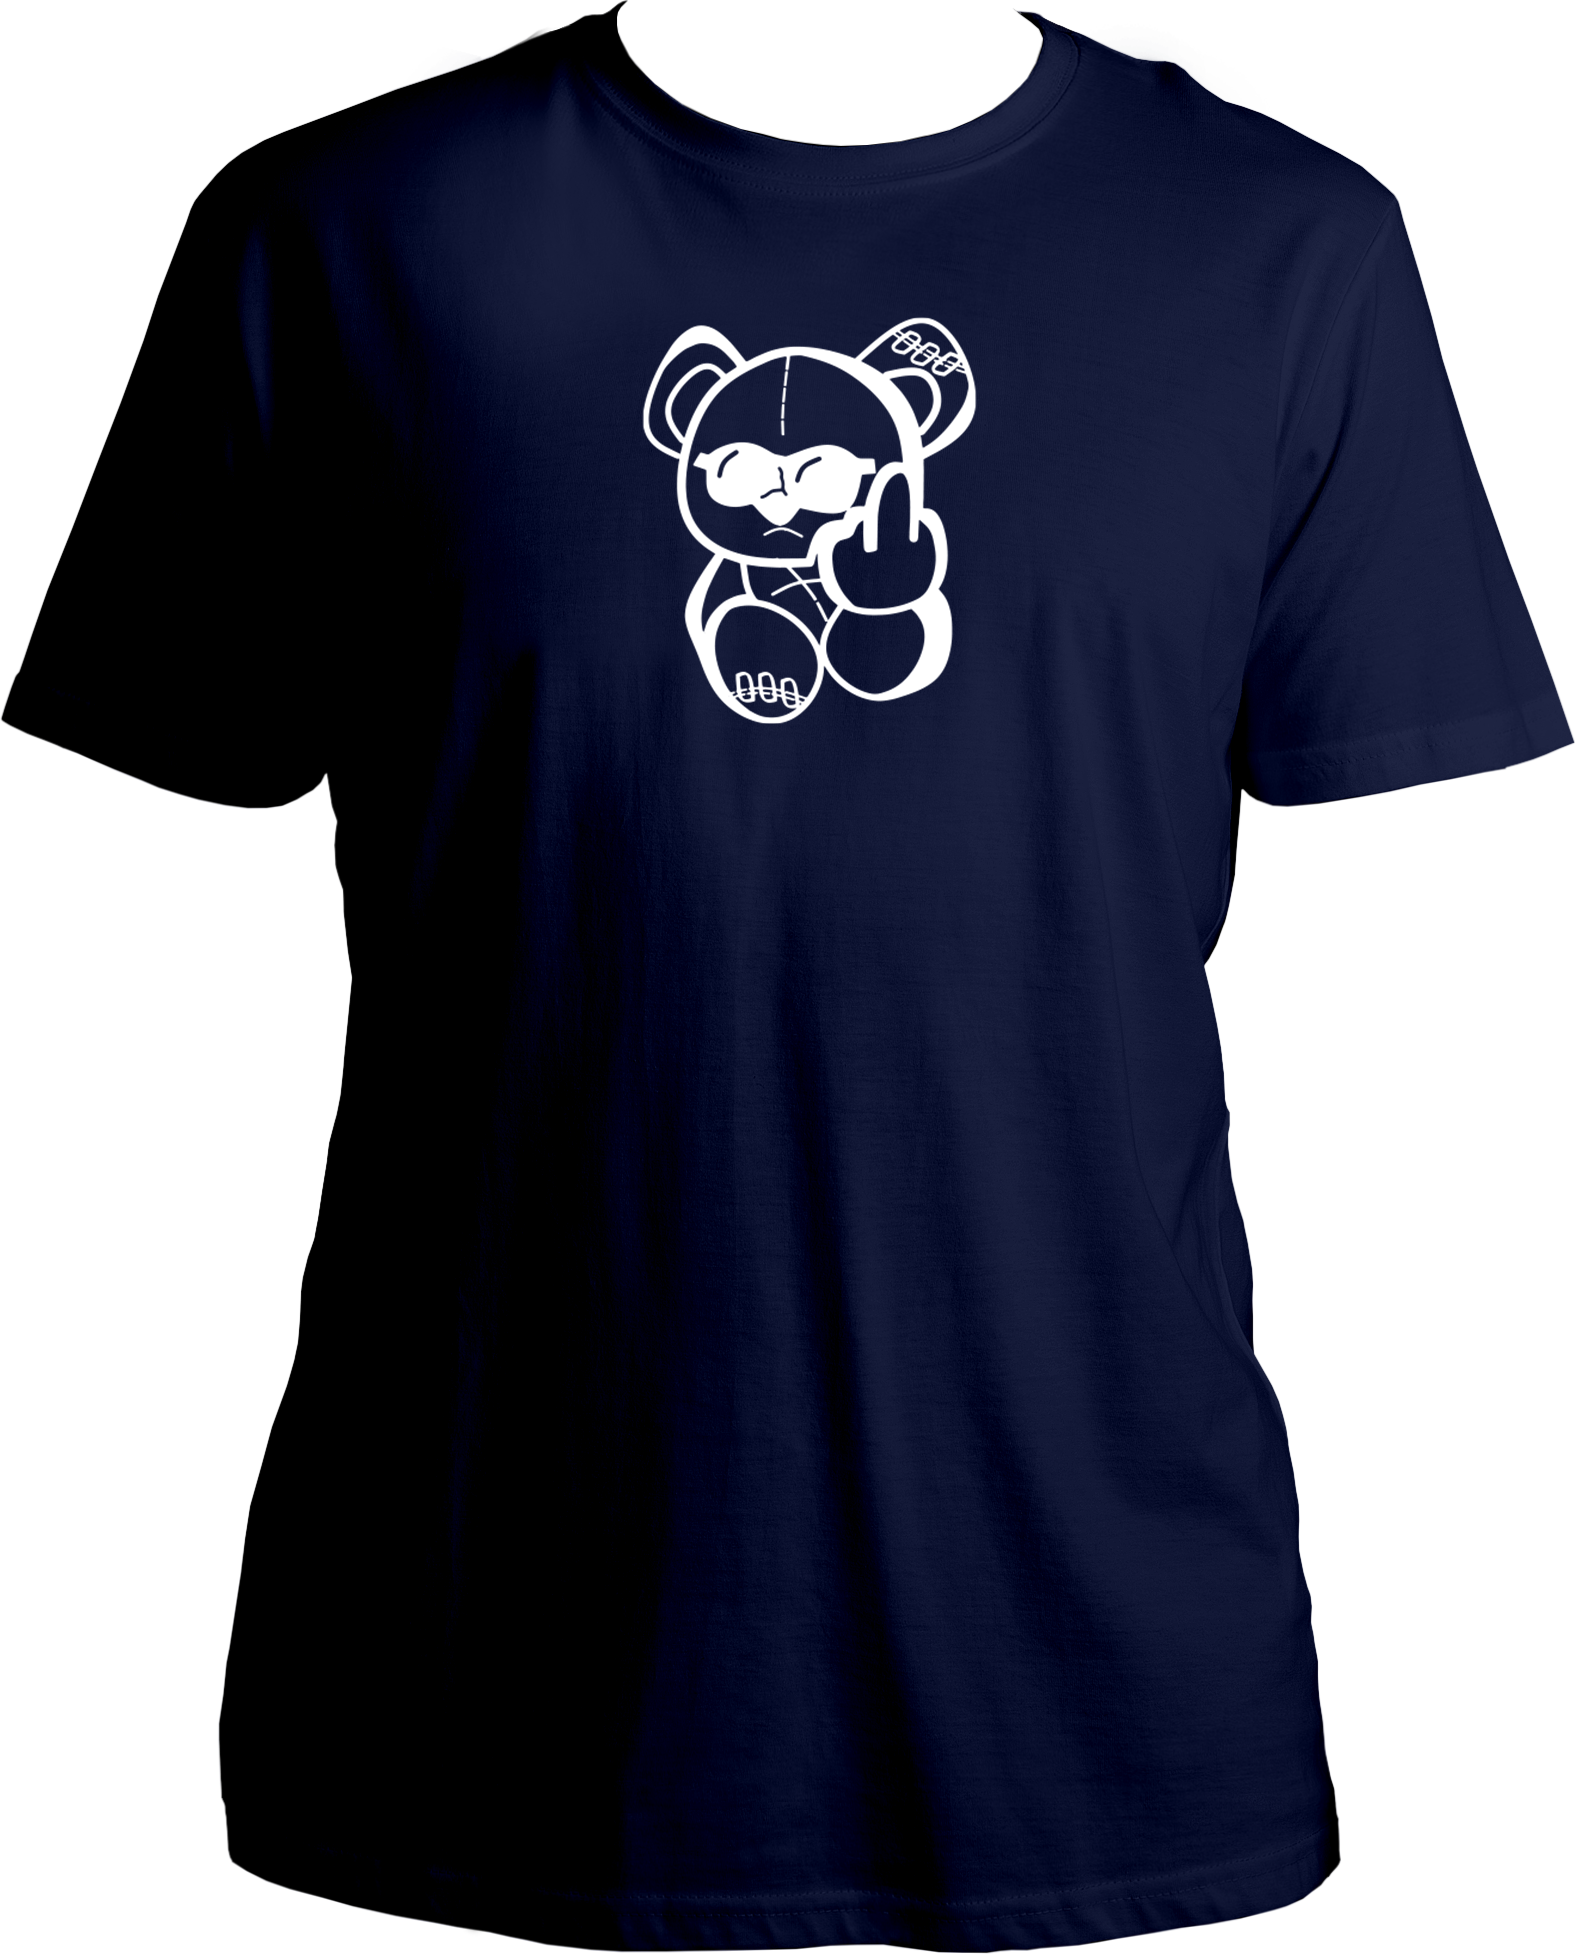 Step up your style game with the KR$NA Trendy Teddy Unisex Cotton T-Shirts, featuring the iconic teddy bear design that every fan loves. This T-shirt blends the playful yet edgy vibe of KR$NA’s music, making it a must-have for all dedicated followers and hip-hop enthusiasts.